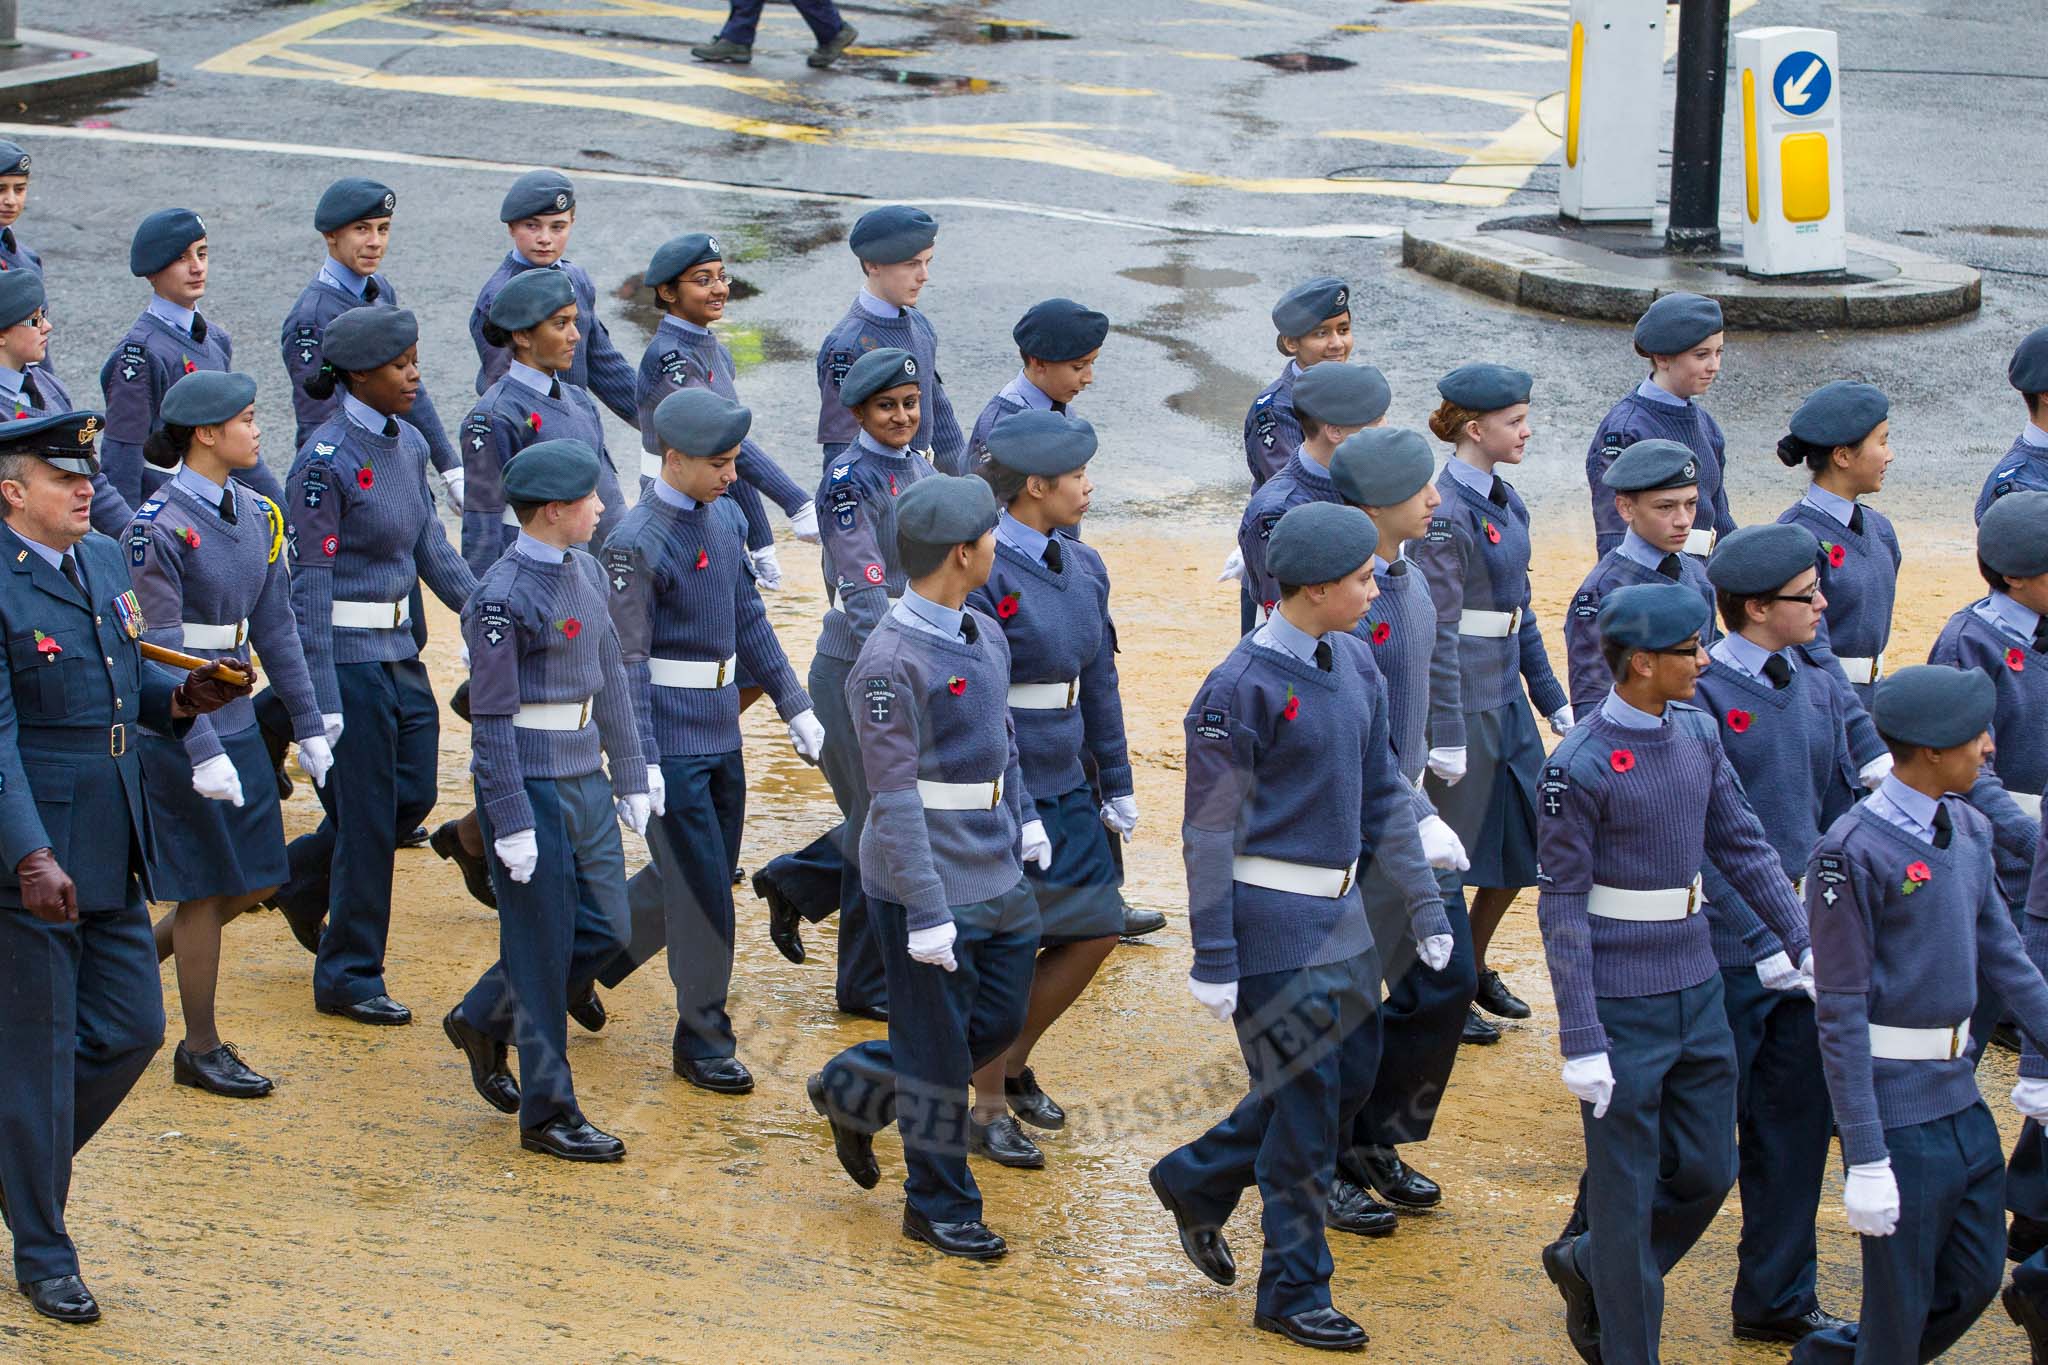 Lord Mayor's Show 2012: Entry 24 - Air Training Corps, the Air Cadets is the world's largest youth air training organisation..
Press stand opposite Mansion House, City of London,
London,
Greater London,
United Kingdom,
on 10 November 2012 at 11:11, image #414